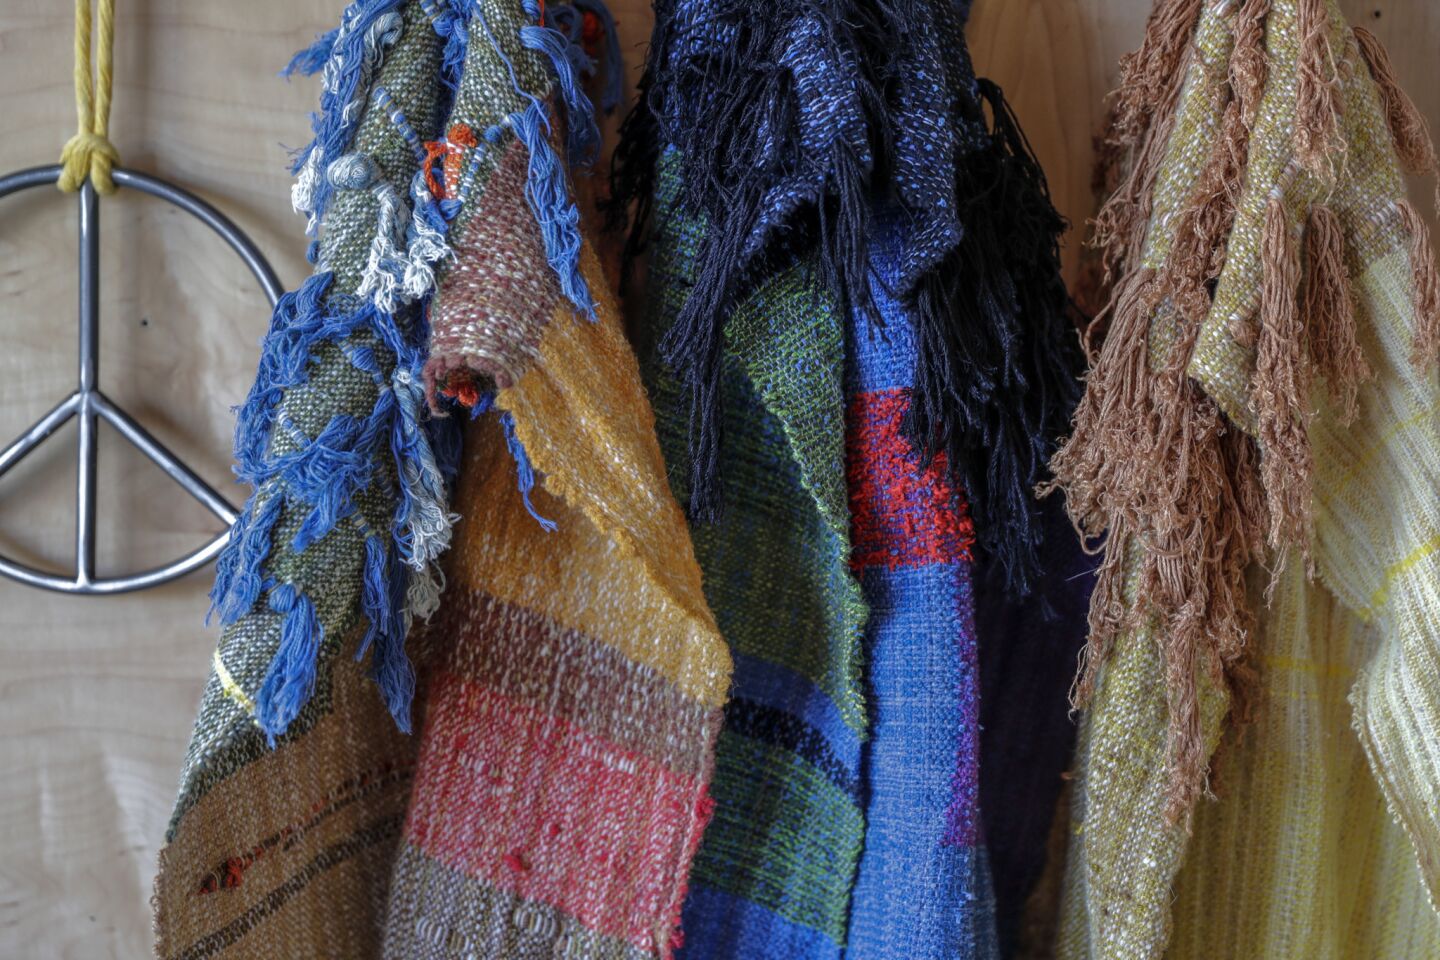 Handwoven color block scarves for sale at the All Roads store.